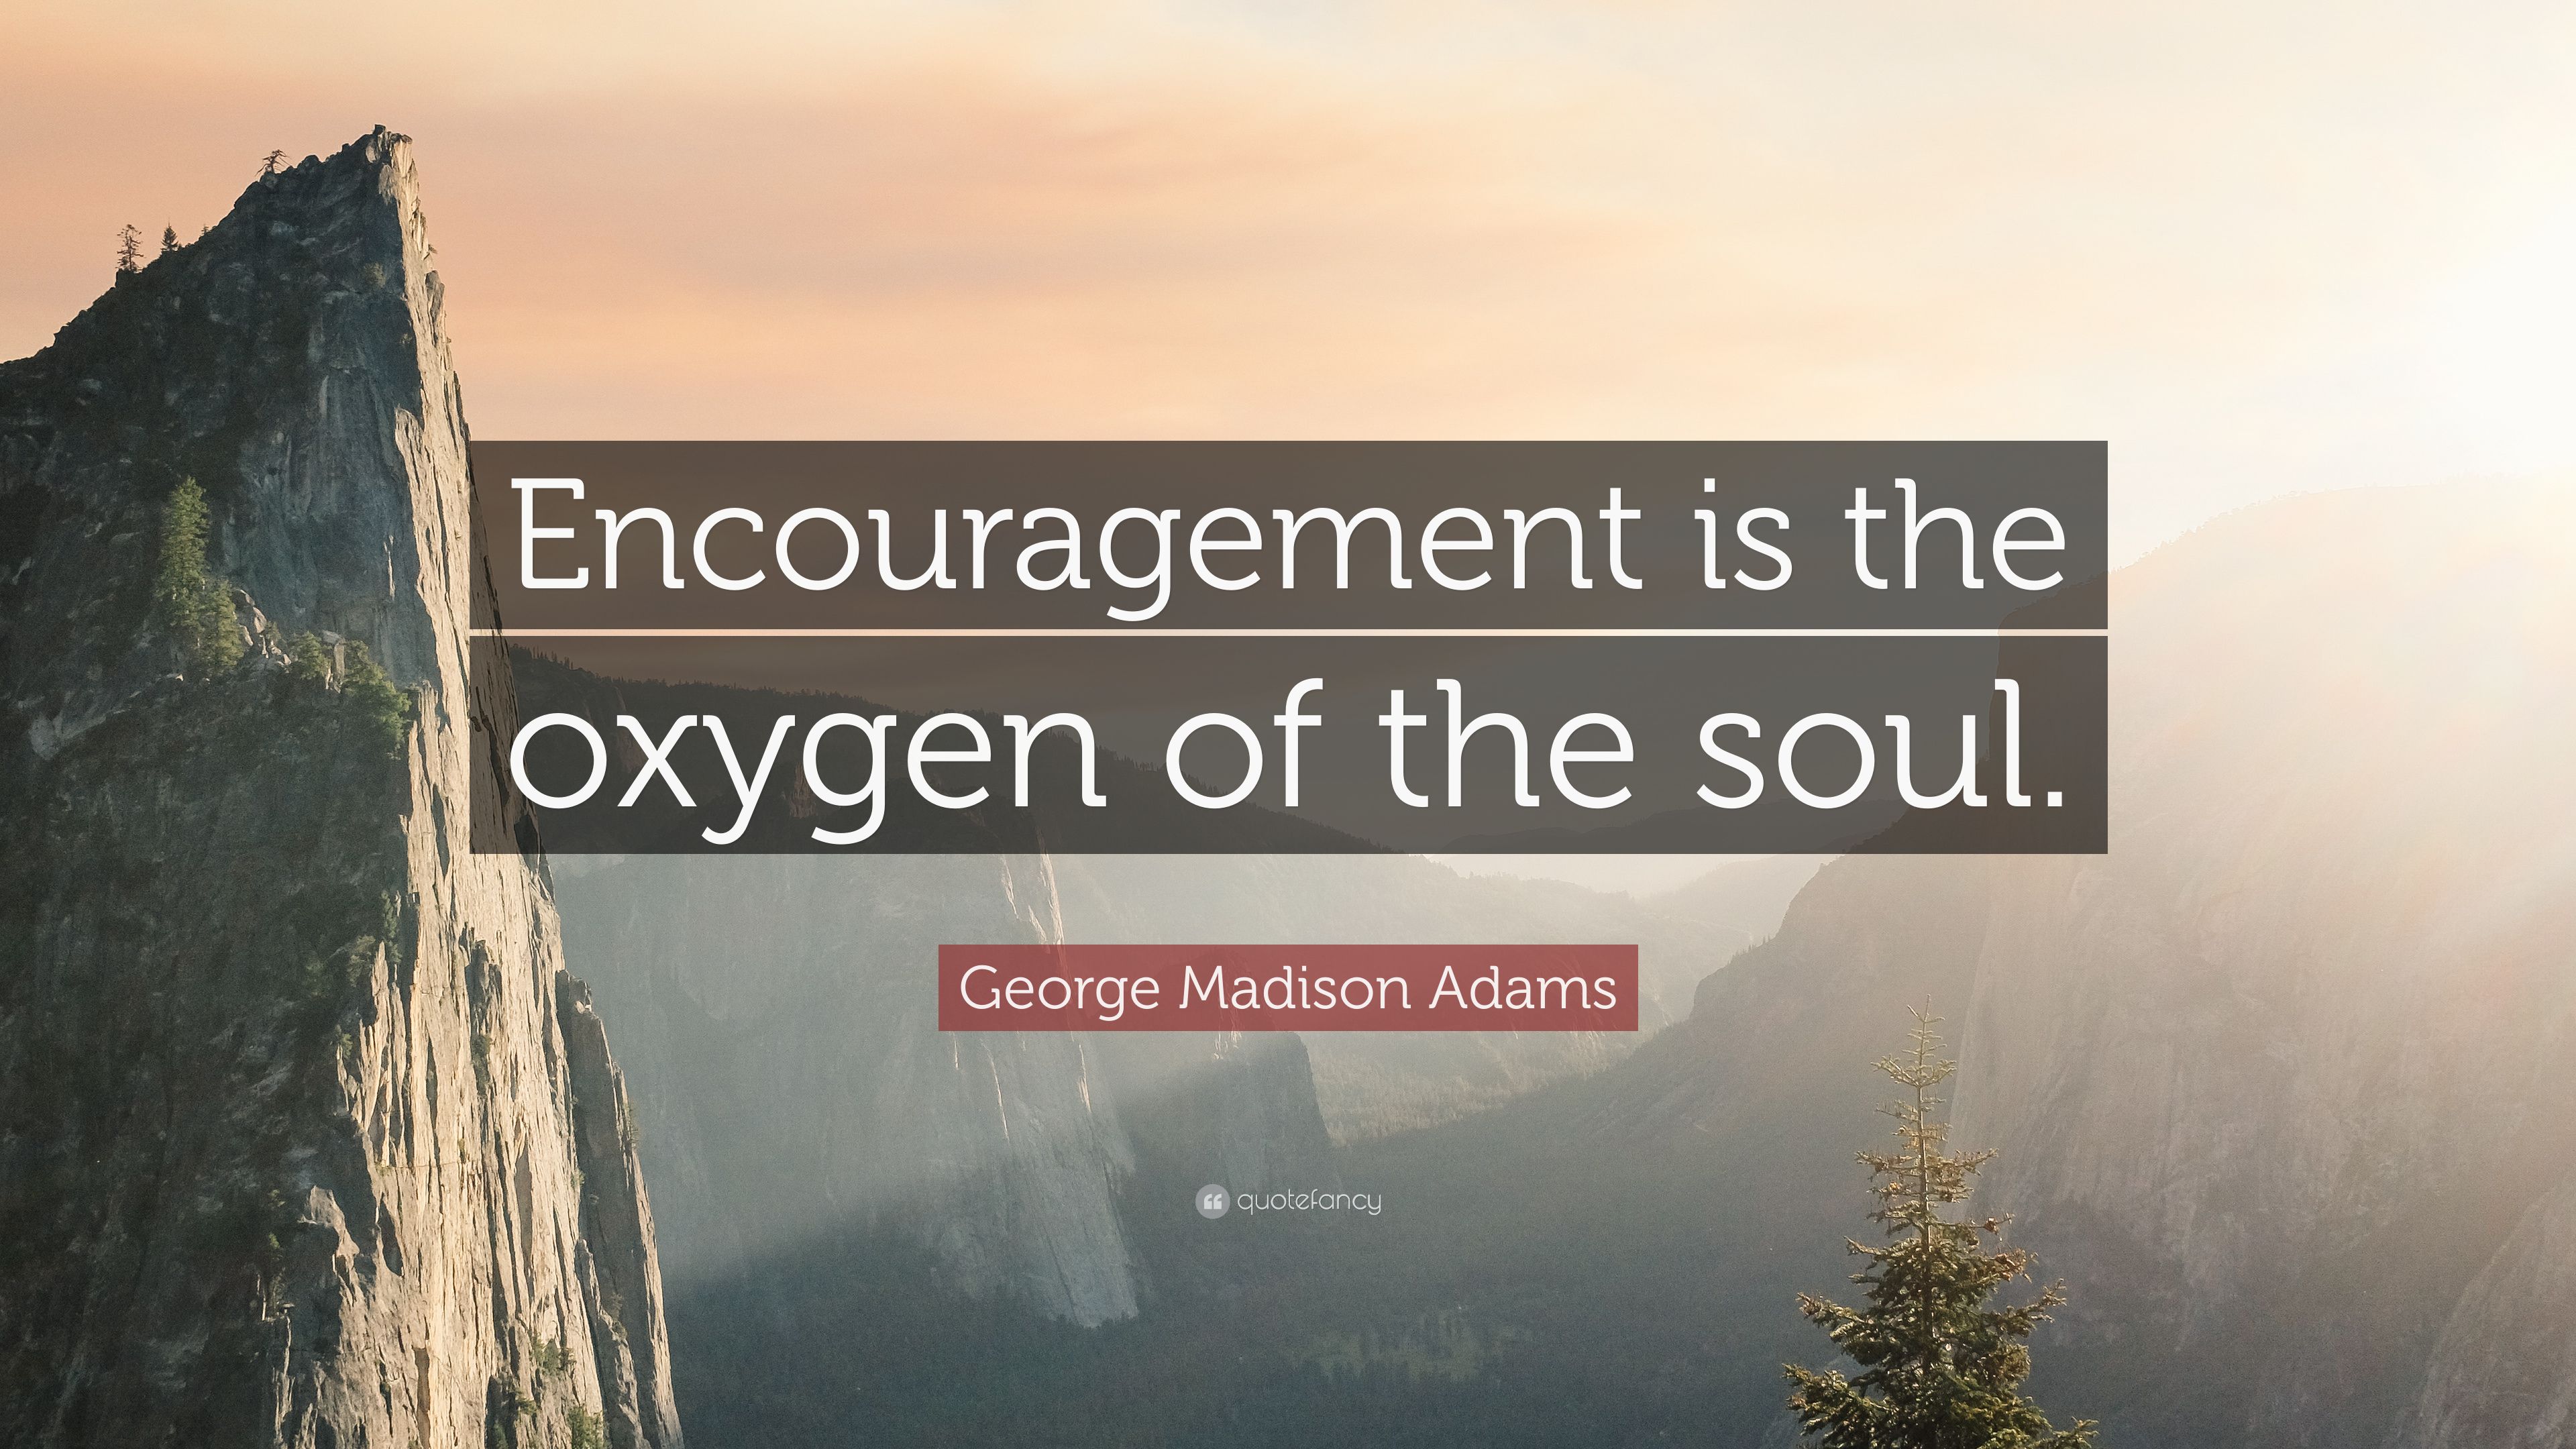 George Madison Adams Quote: “Encouragement is the oxygen of the soul.” (7 wallpaper)